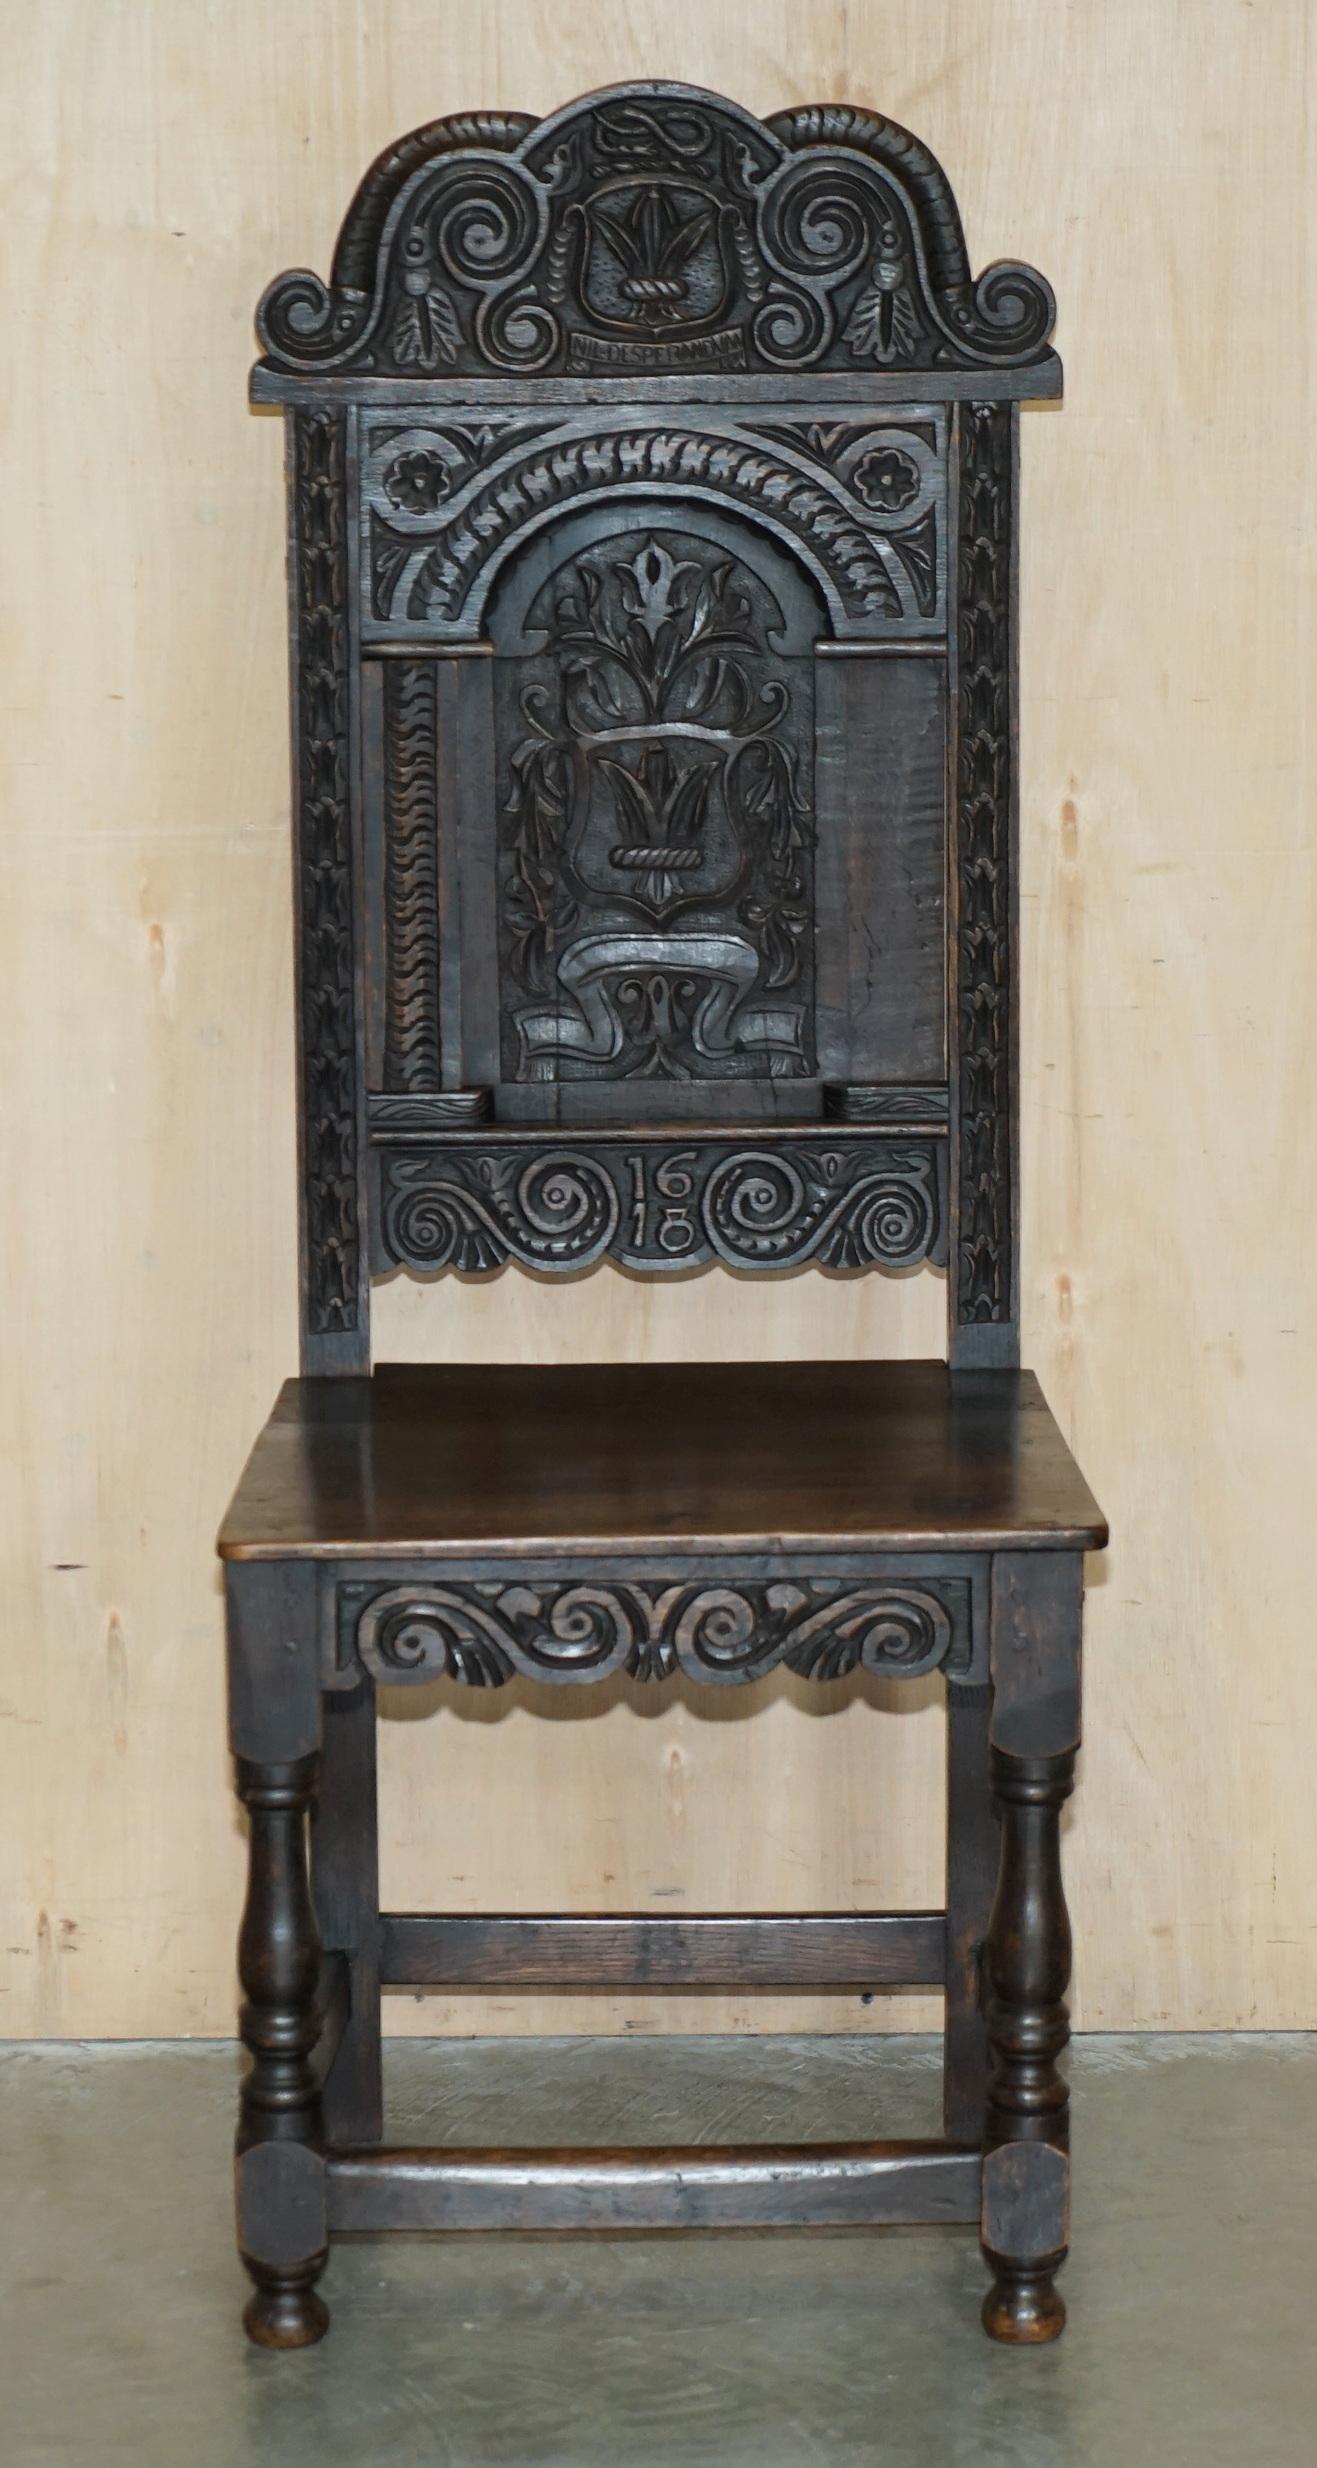 ANTIQUE PAIR OF 17TH CENTURY JACOBEAN ENGLISH OAK CHAIRS FROM THE FILM HELLBOy im Angebot 11